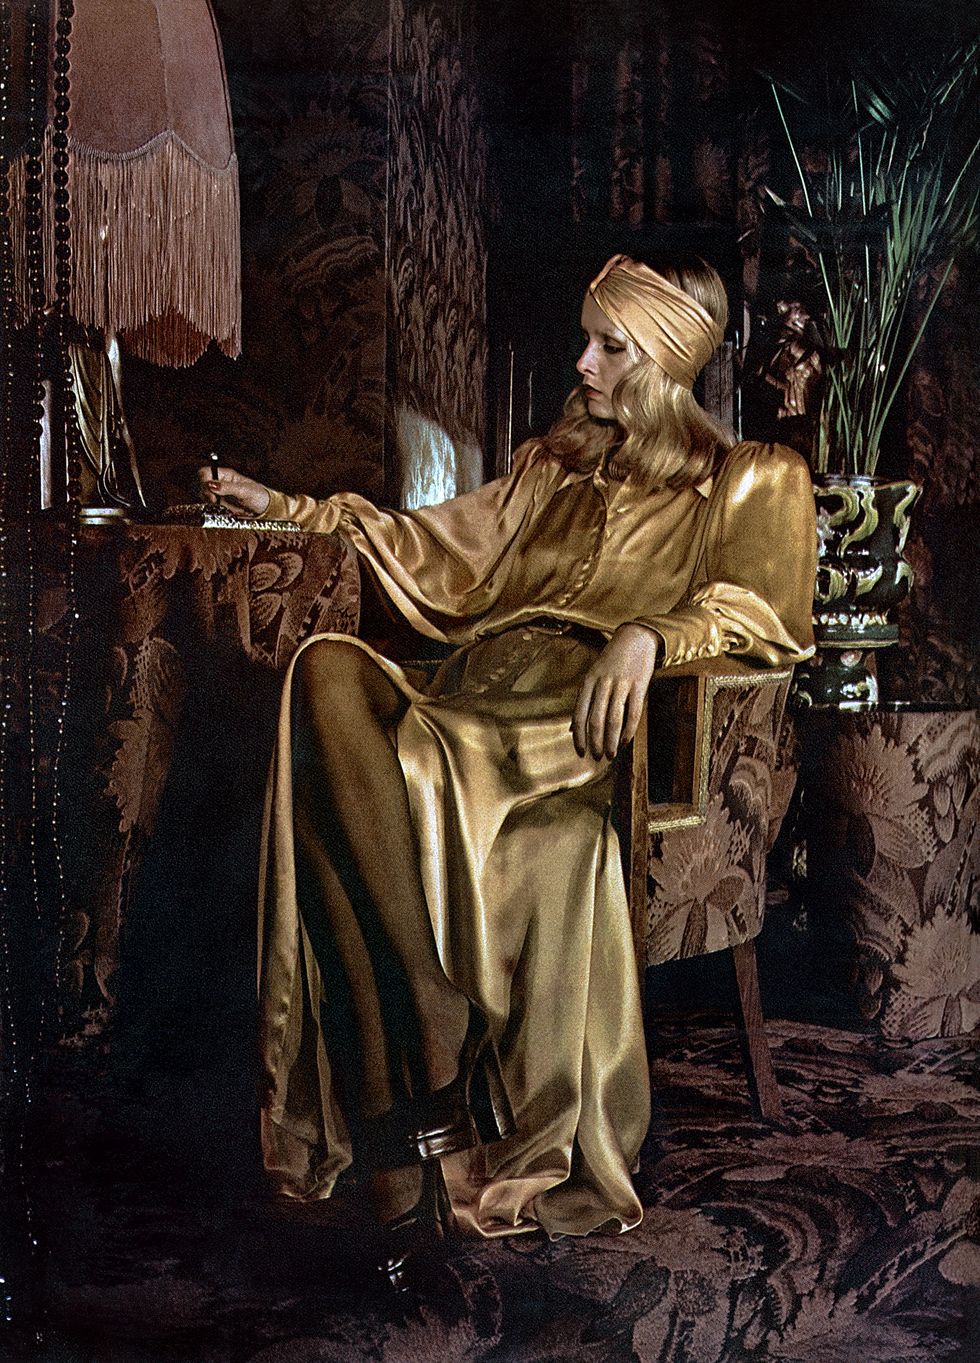 twiggy in the biba fashion store for an article about the designer barbara hulanicki in british vogue, december 1973